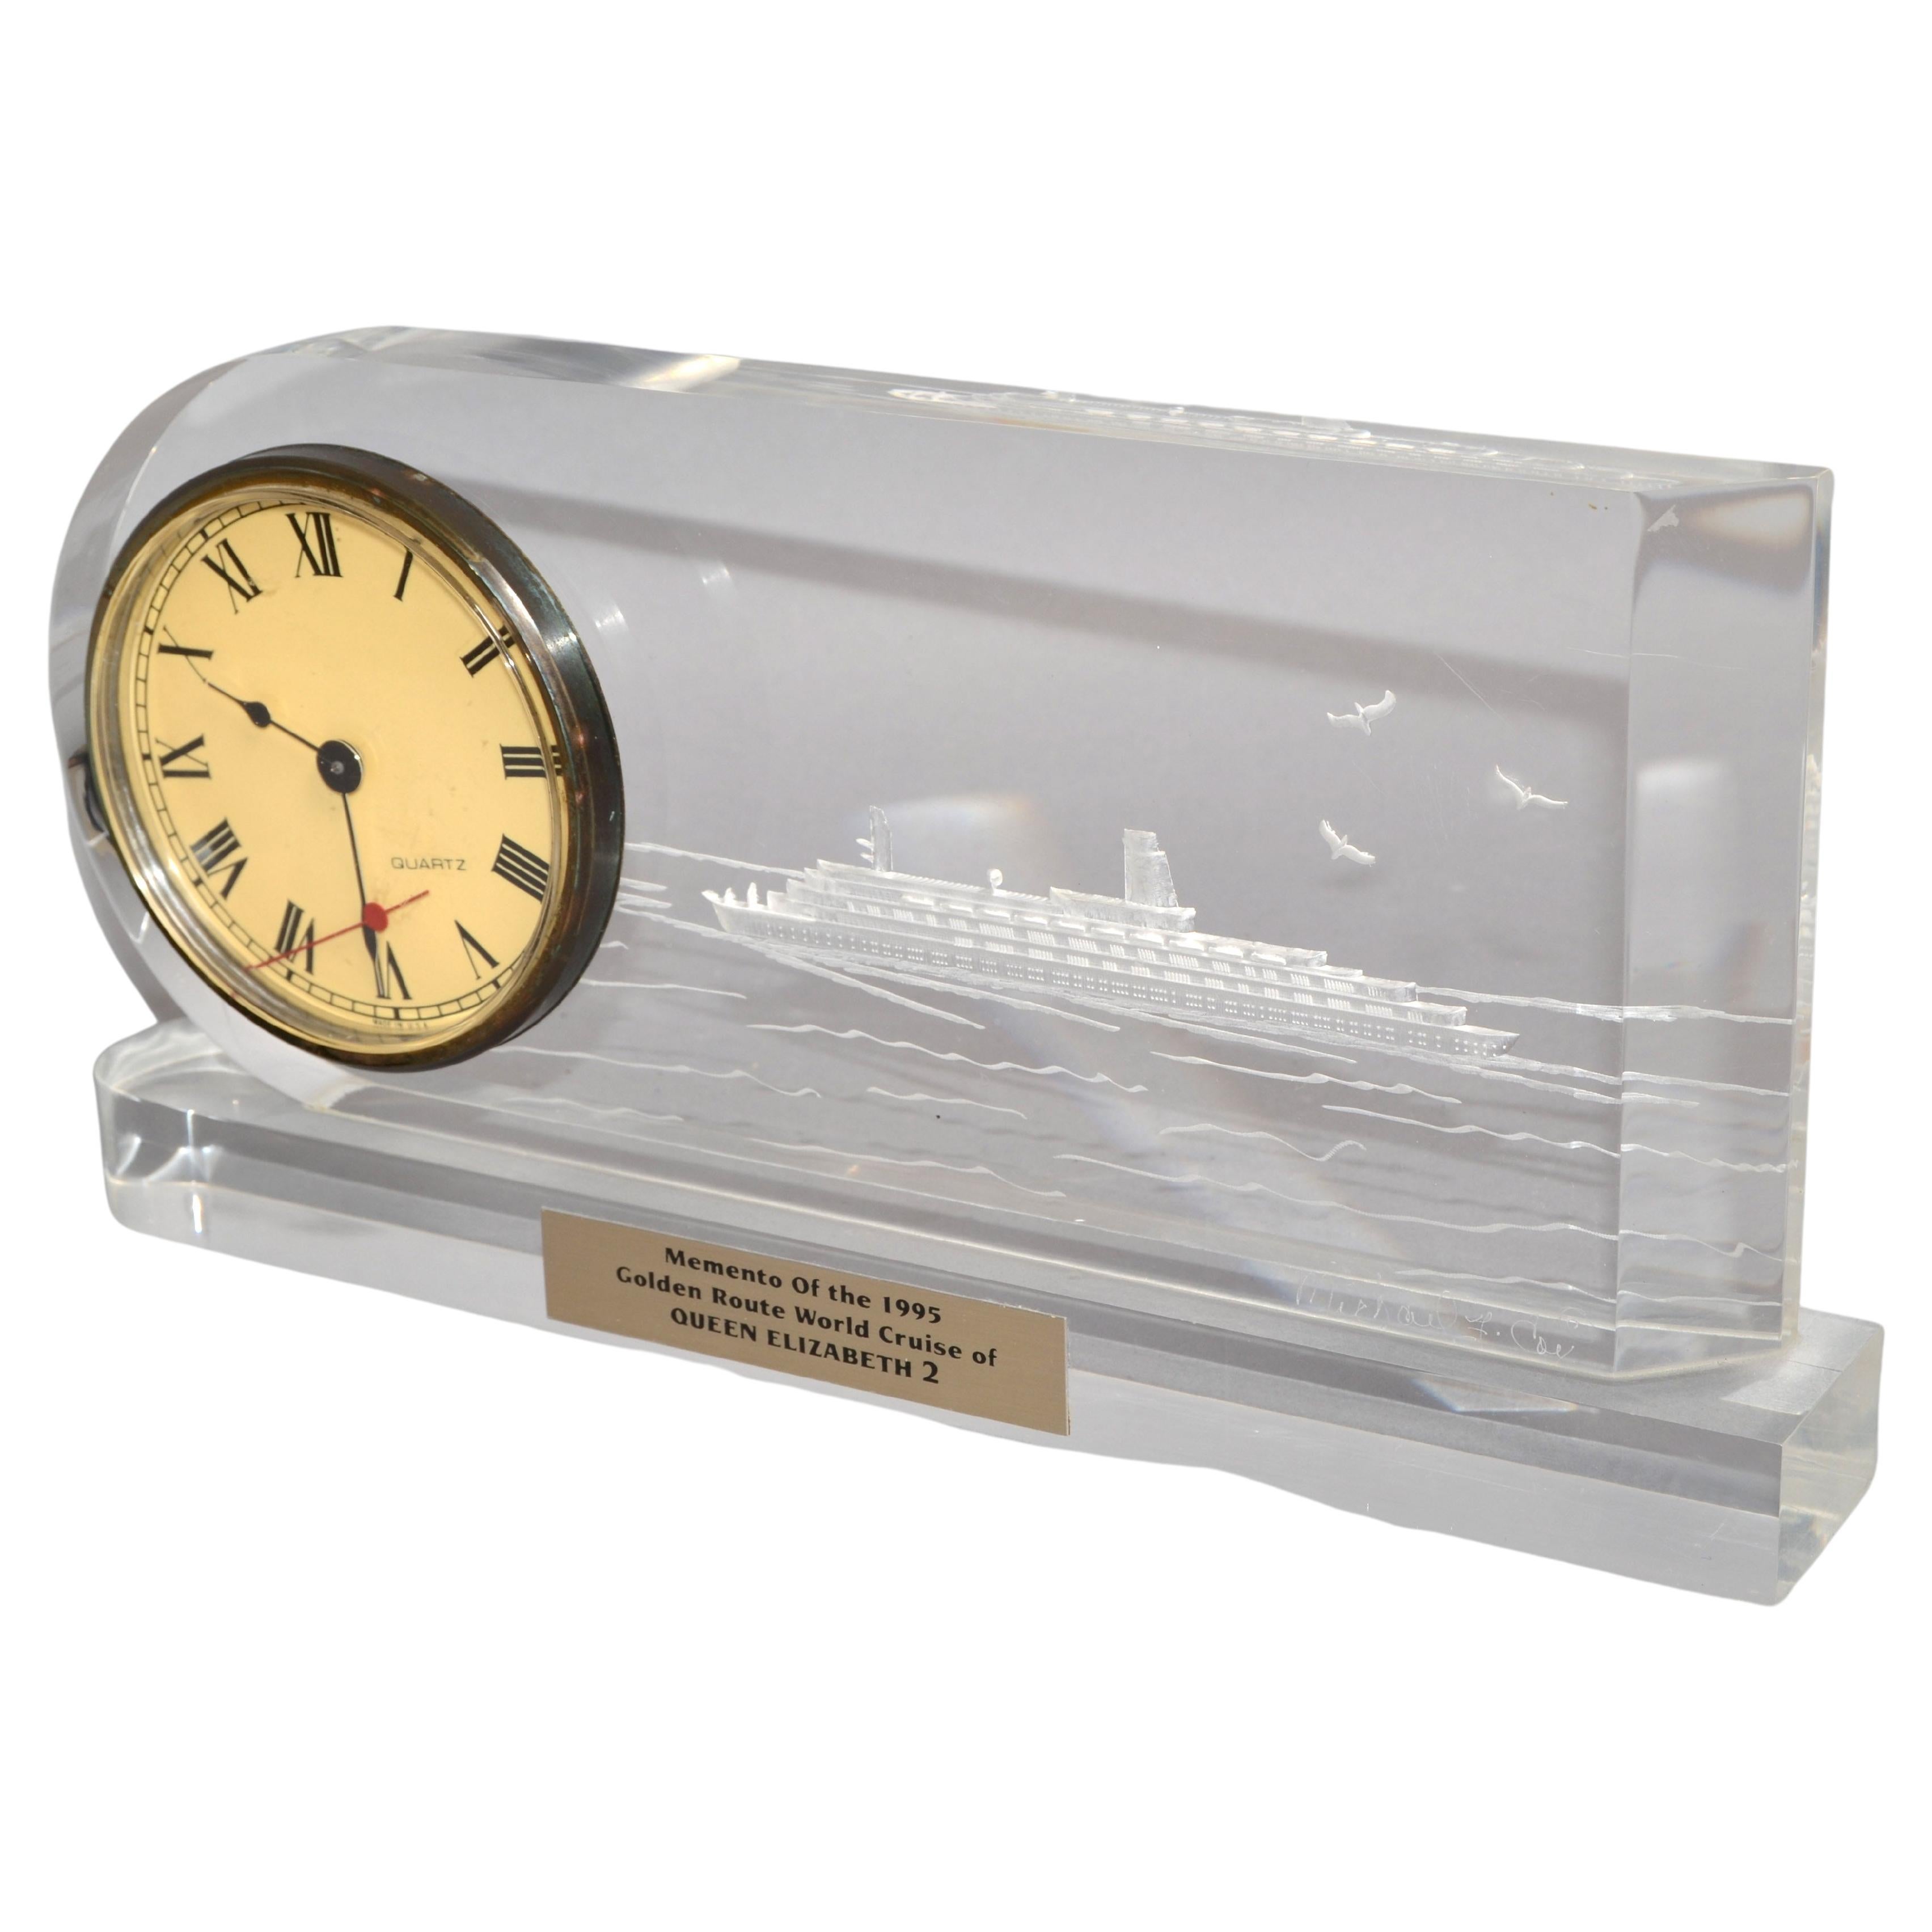 Late 20th century Solid Lucite Desk Clock Reversed Etched Nautical Picture of the Queen Elizabeth 2 at See.
Signed by the Artist Michael F. Cox at the right corner.
Insert in the Lucite is a Quartz Clock which takes a 1.5 V LR1 Battery.
Plaque on